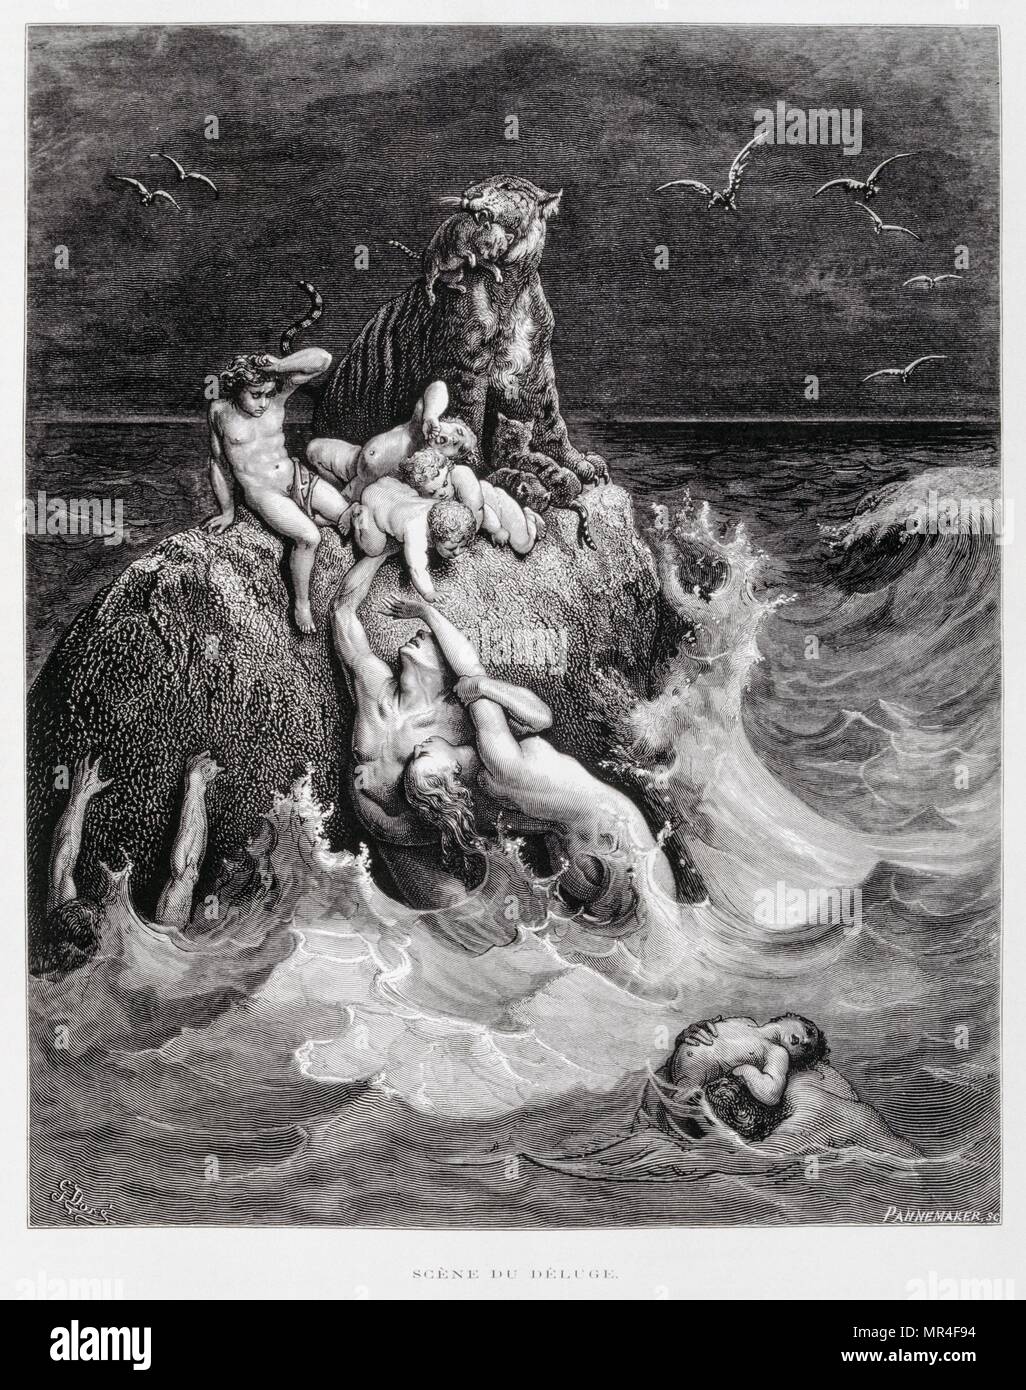 The Great Flood, Illustration from the Dore Bible 1866. In 1866, the French artist and illustrator Gustave Dore (1832–1883), published a series of 241 wood engravings for a new deluxe edition of the 1843 French translation of the Vulgate Bible, popularly known as the Bible de Tours. This new edition was known as La Grande Bible de Tours and its illustrations were immensely successful Stock Photo